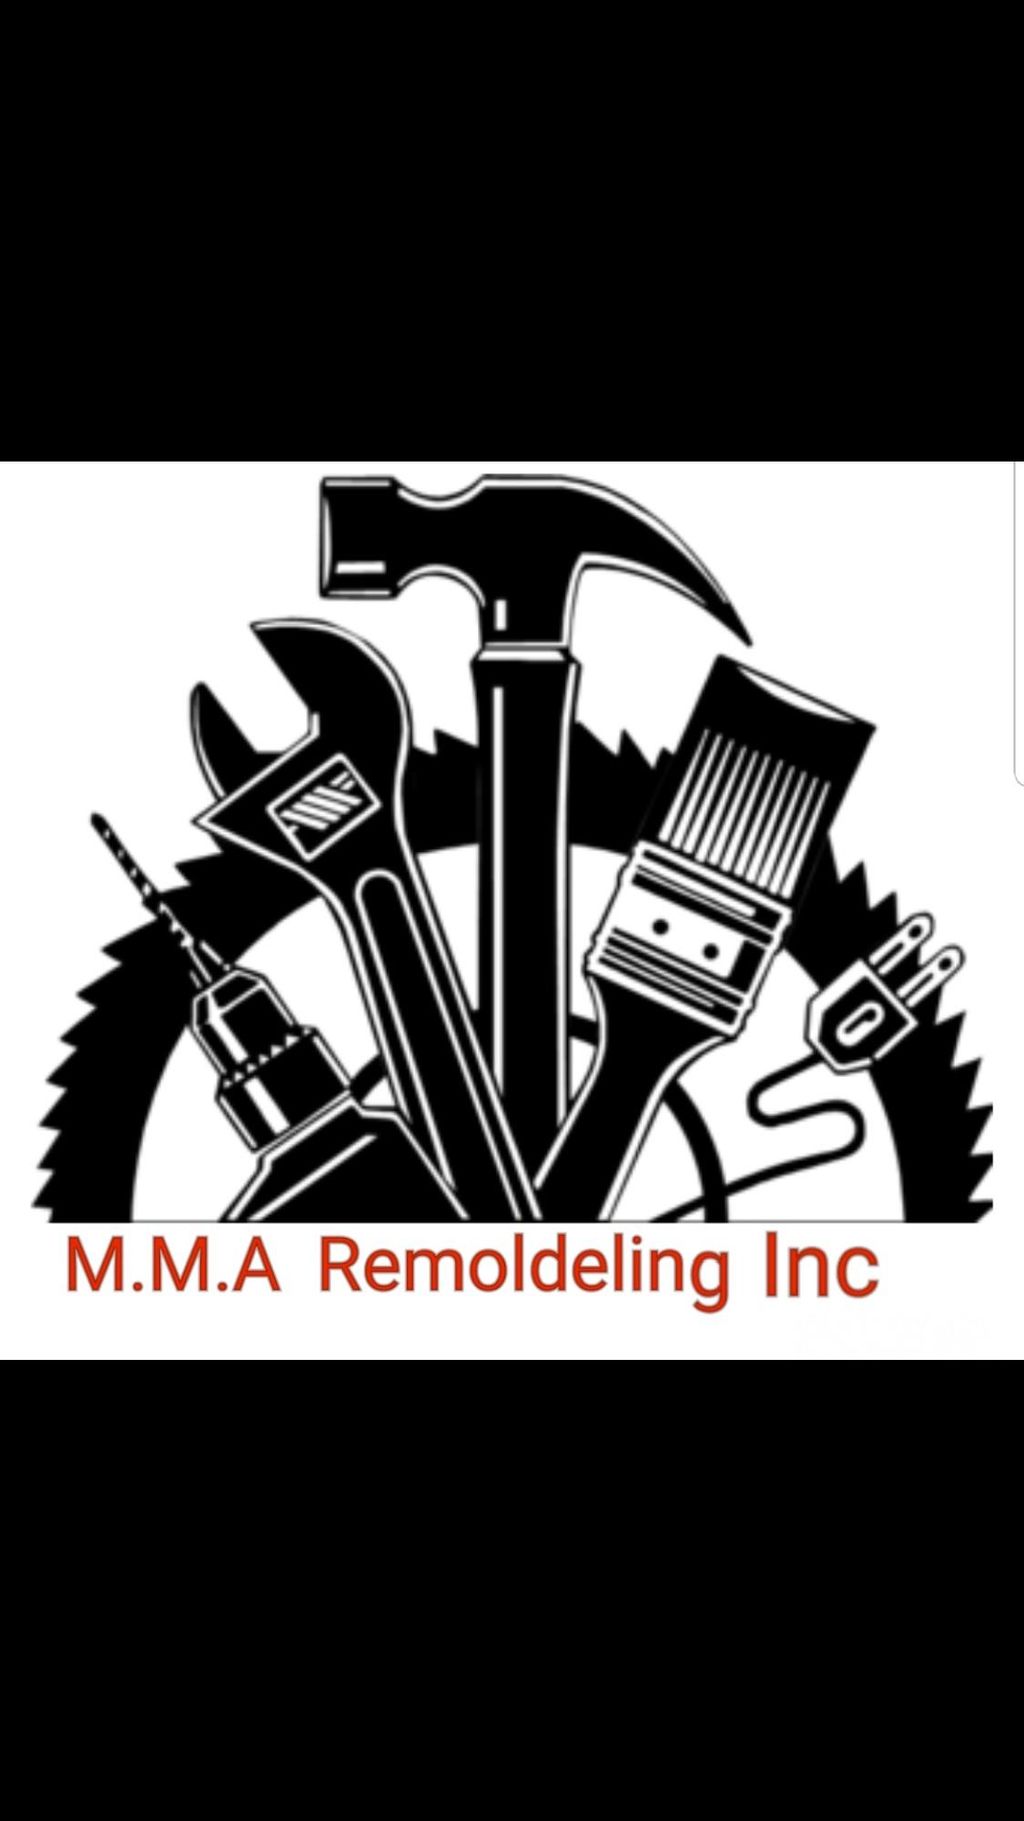 M.M.A. Remodeling Inc